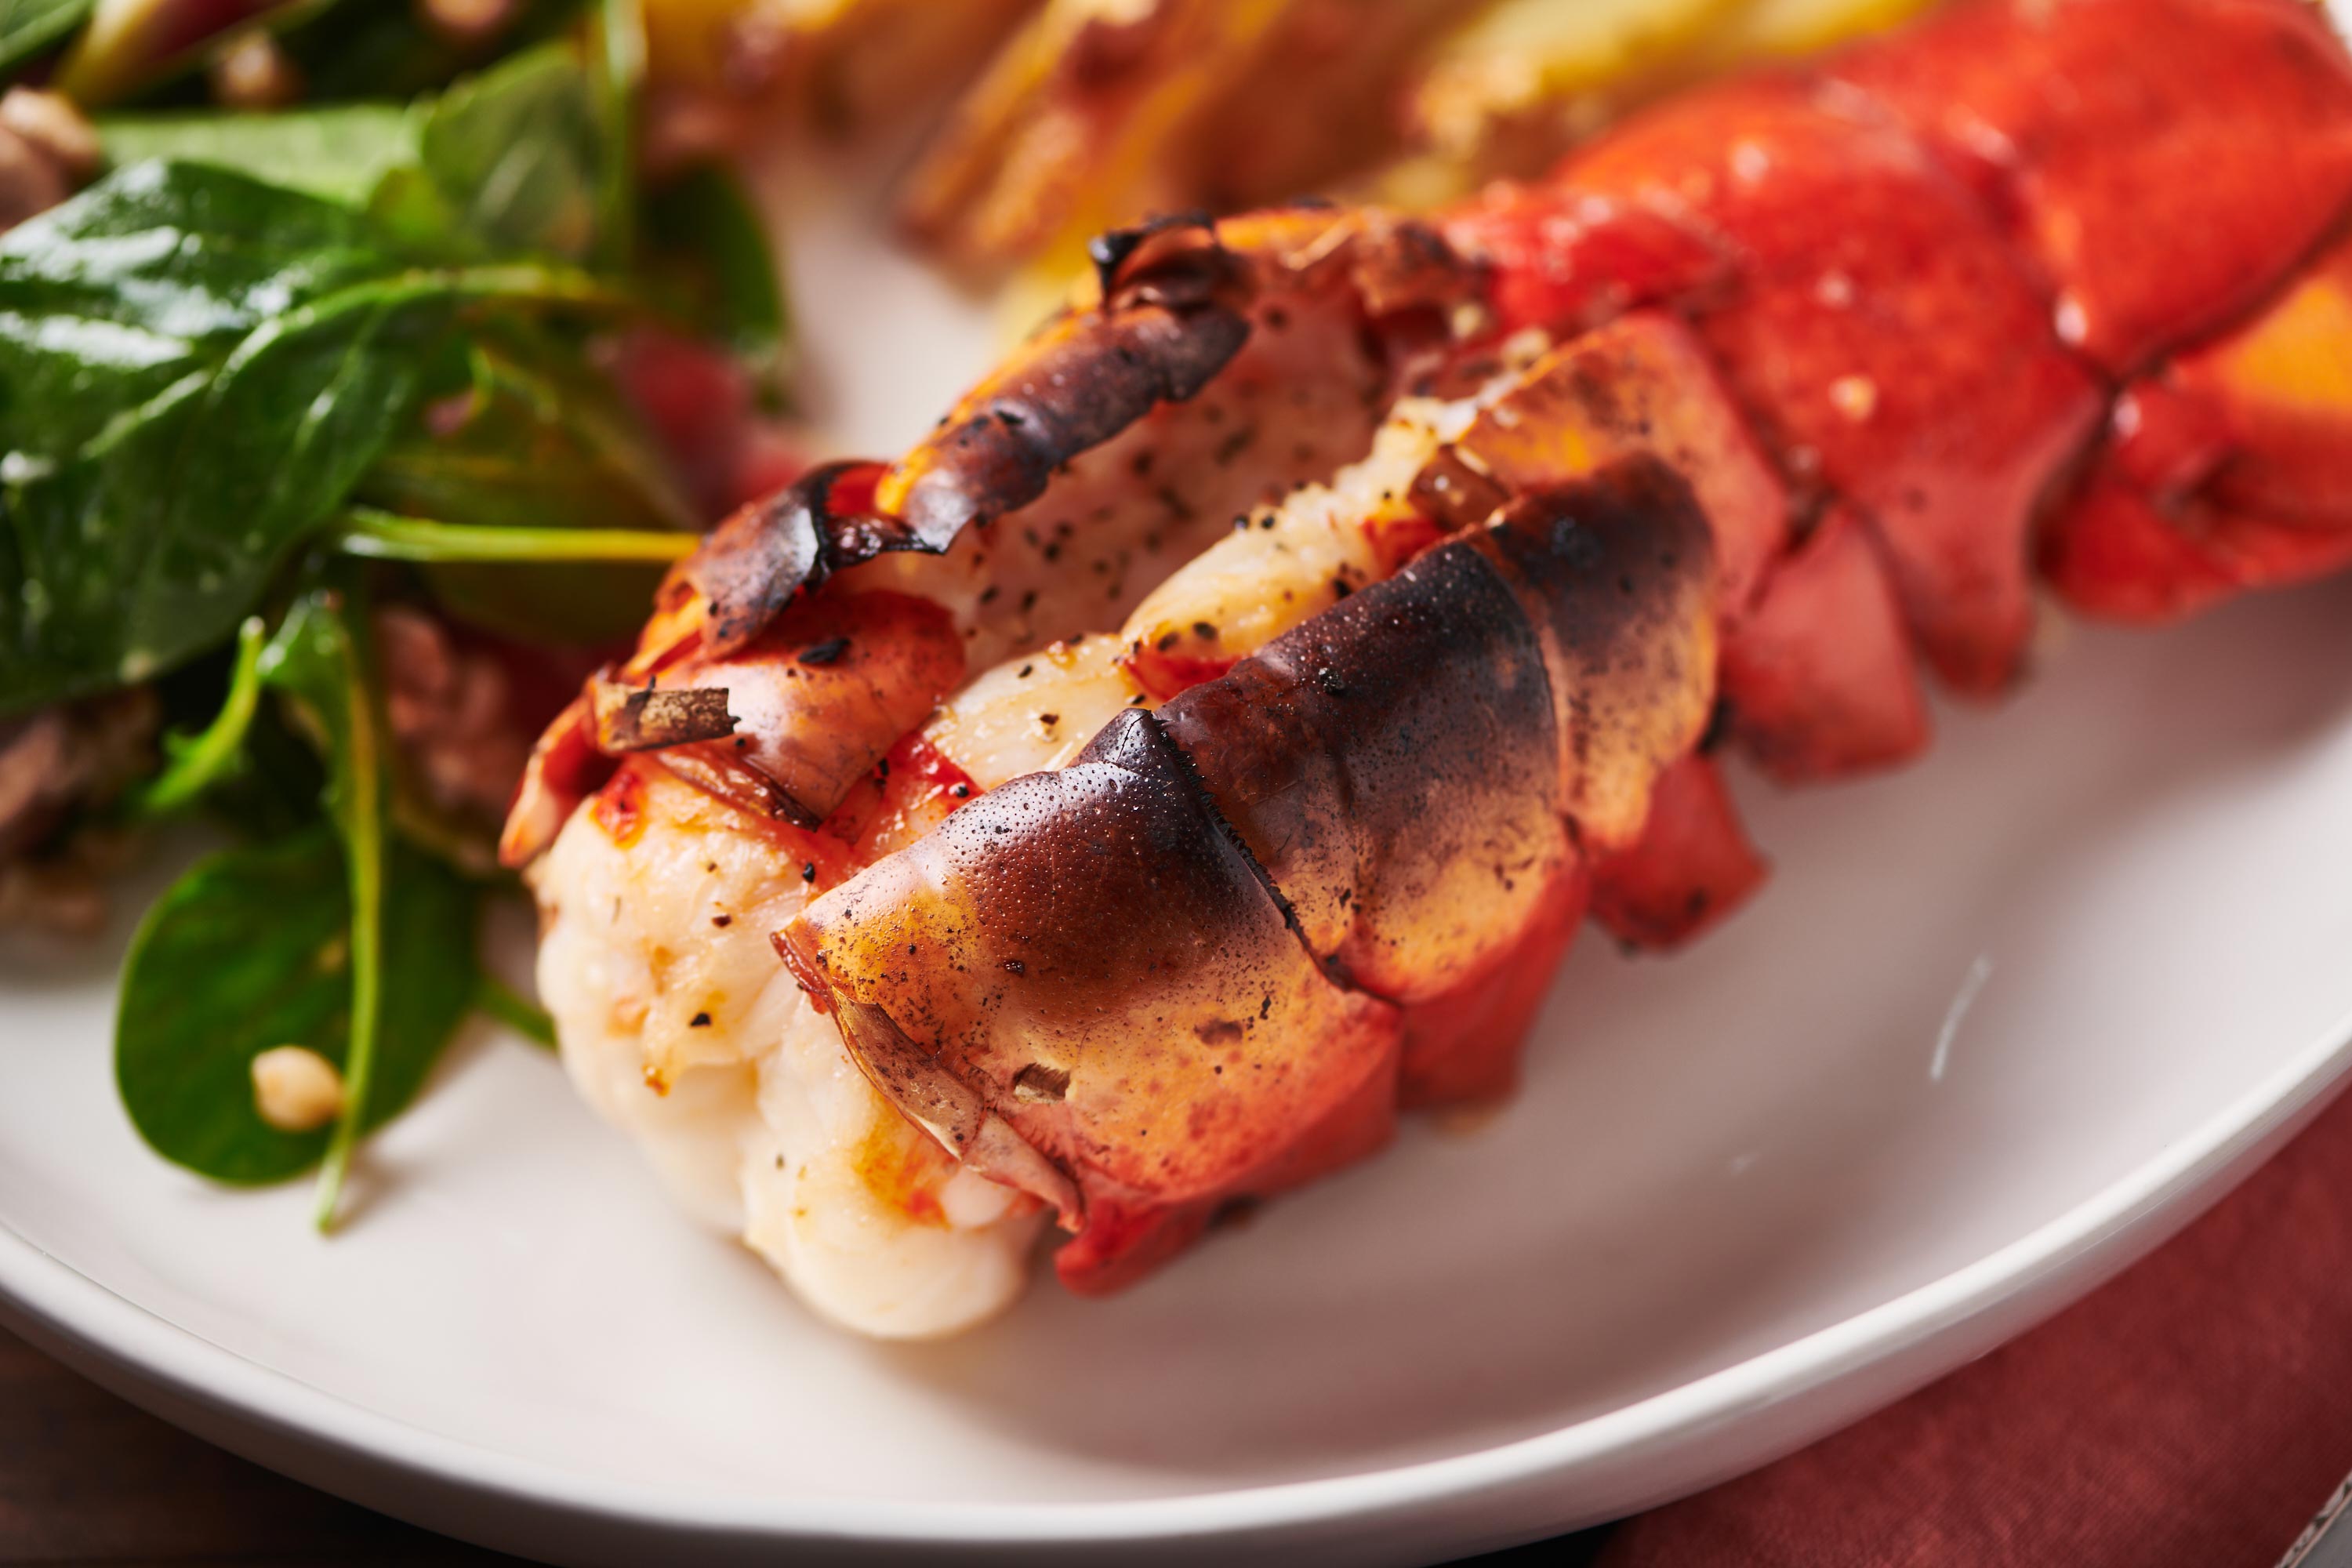 Split broiled lobster tail on a plate with salad.